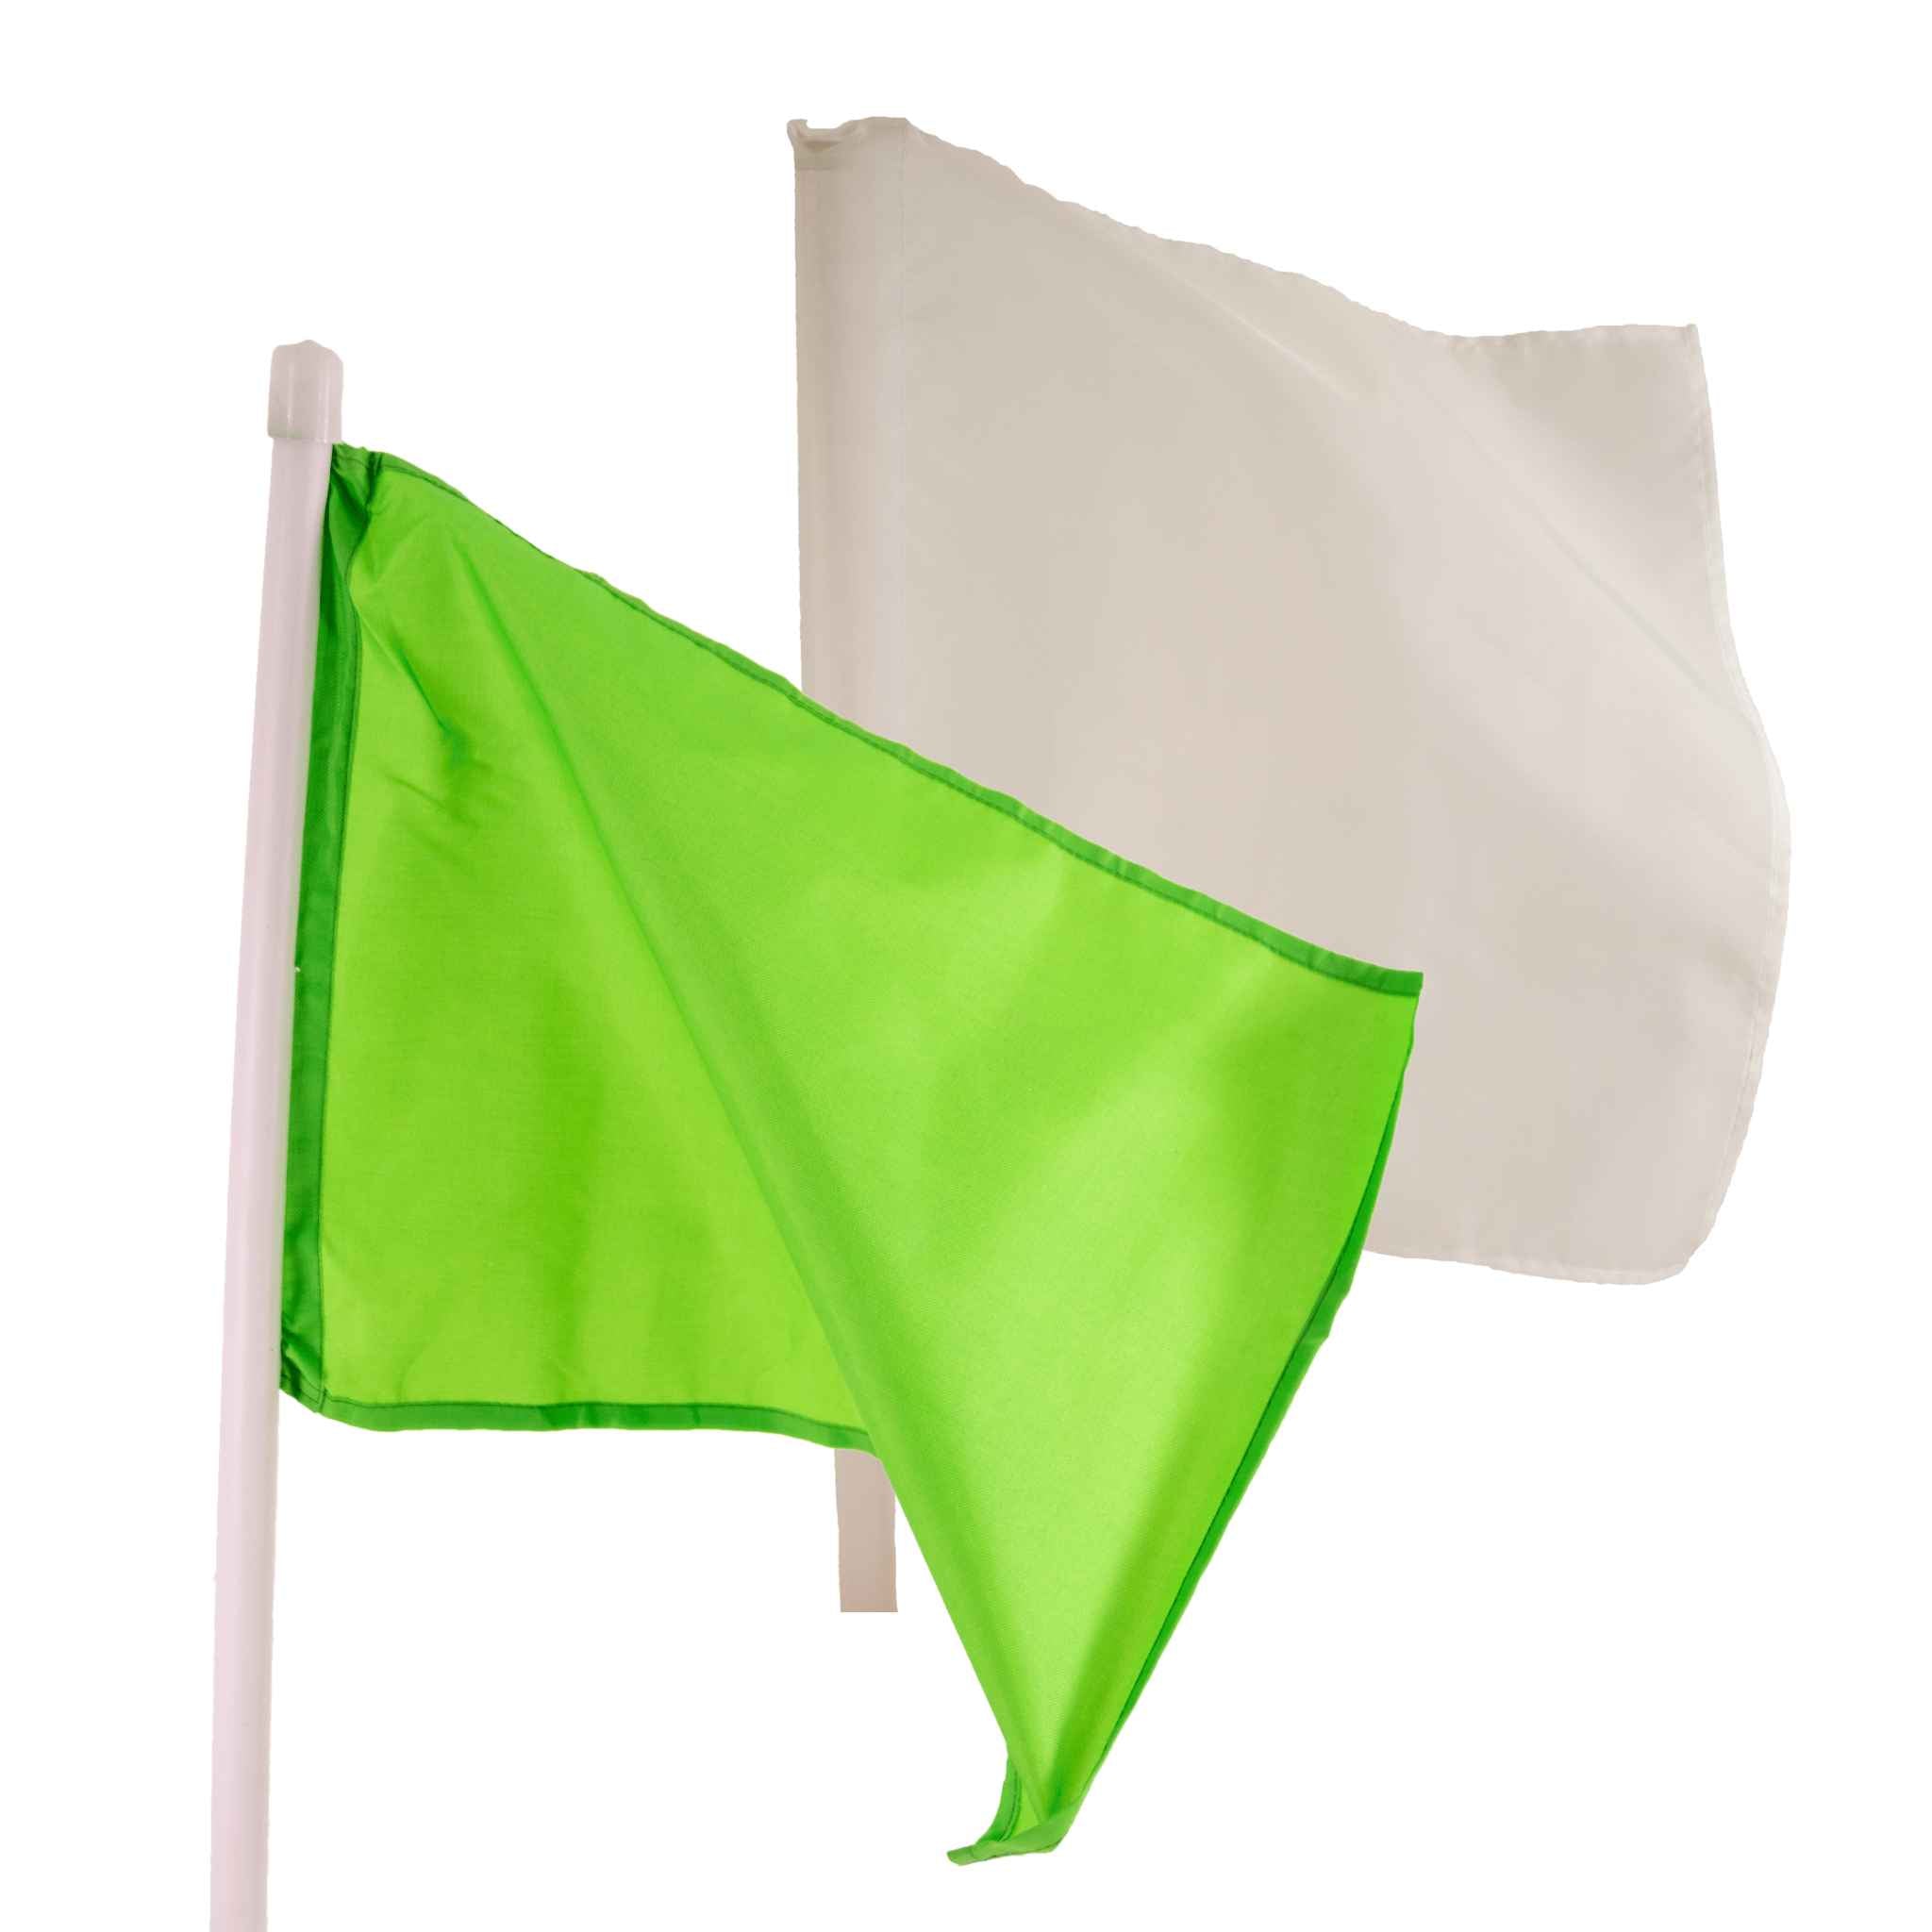 Fabric Flags for Athletics Officials and Sports Use | Simple solid handle | One Green, One White